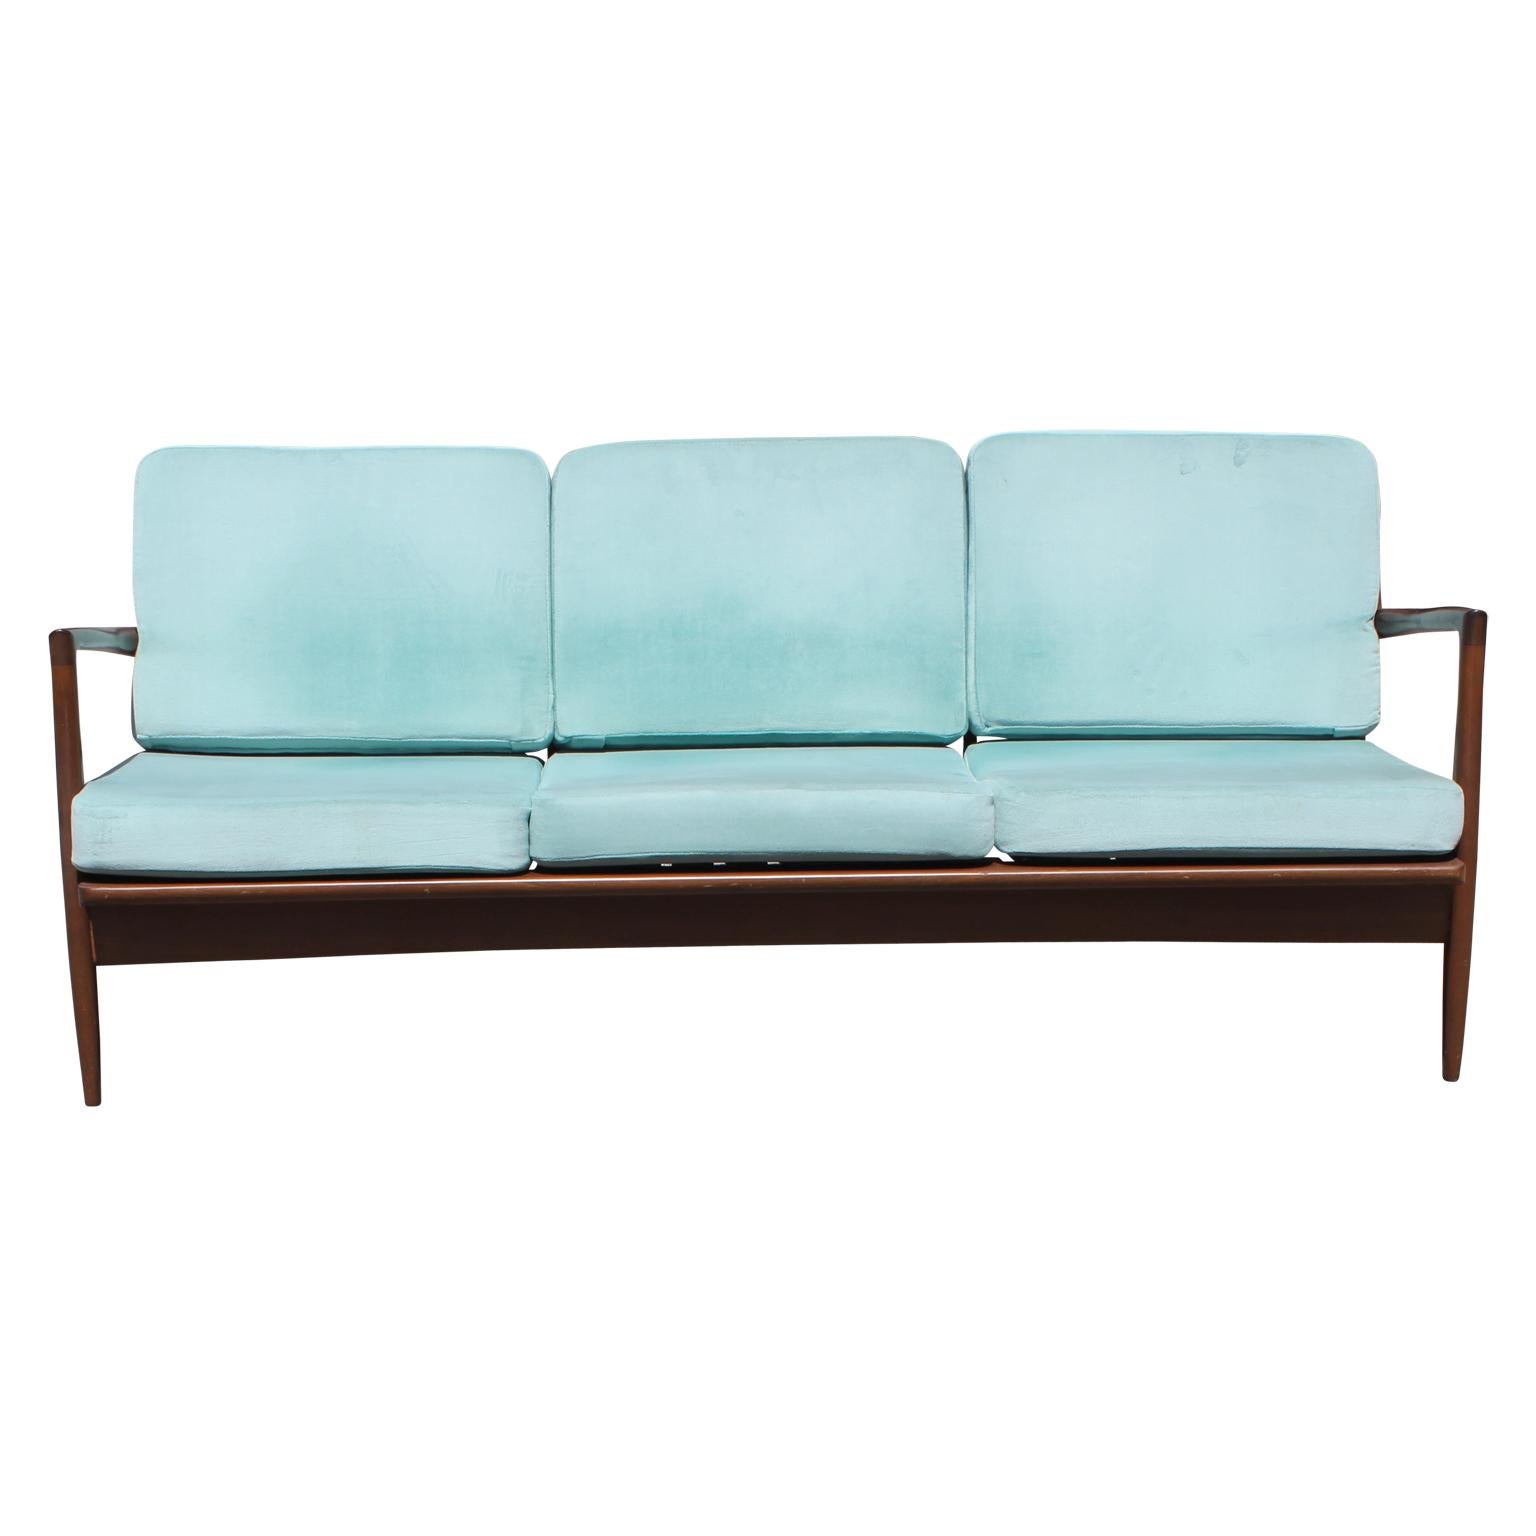 Sleek Mid-Century Modern settee made from teak wood in the Danish style. This sofa is by Ib Kofod-Larsen for Selig. The customer can reupholster the pillows COM.